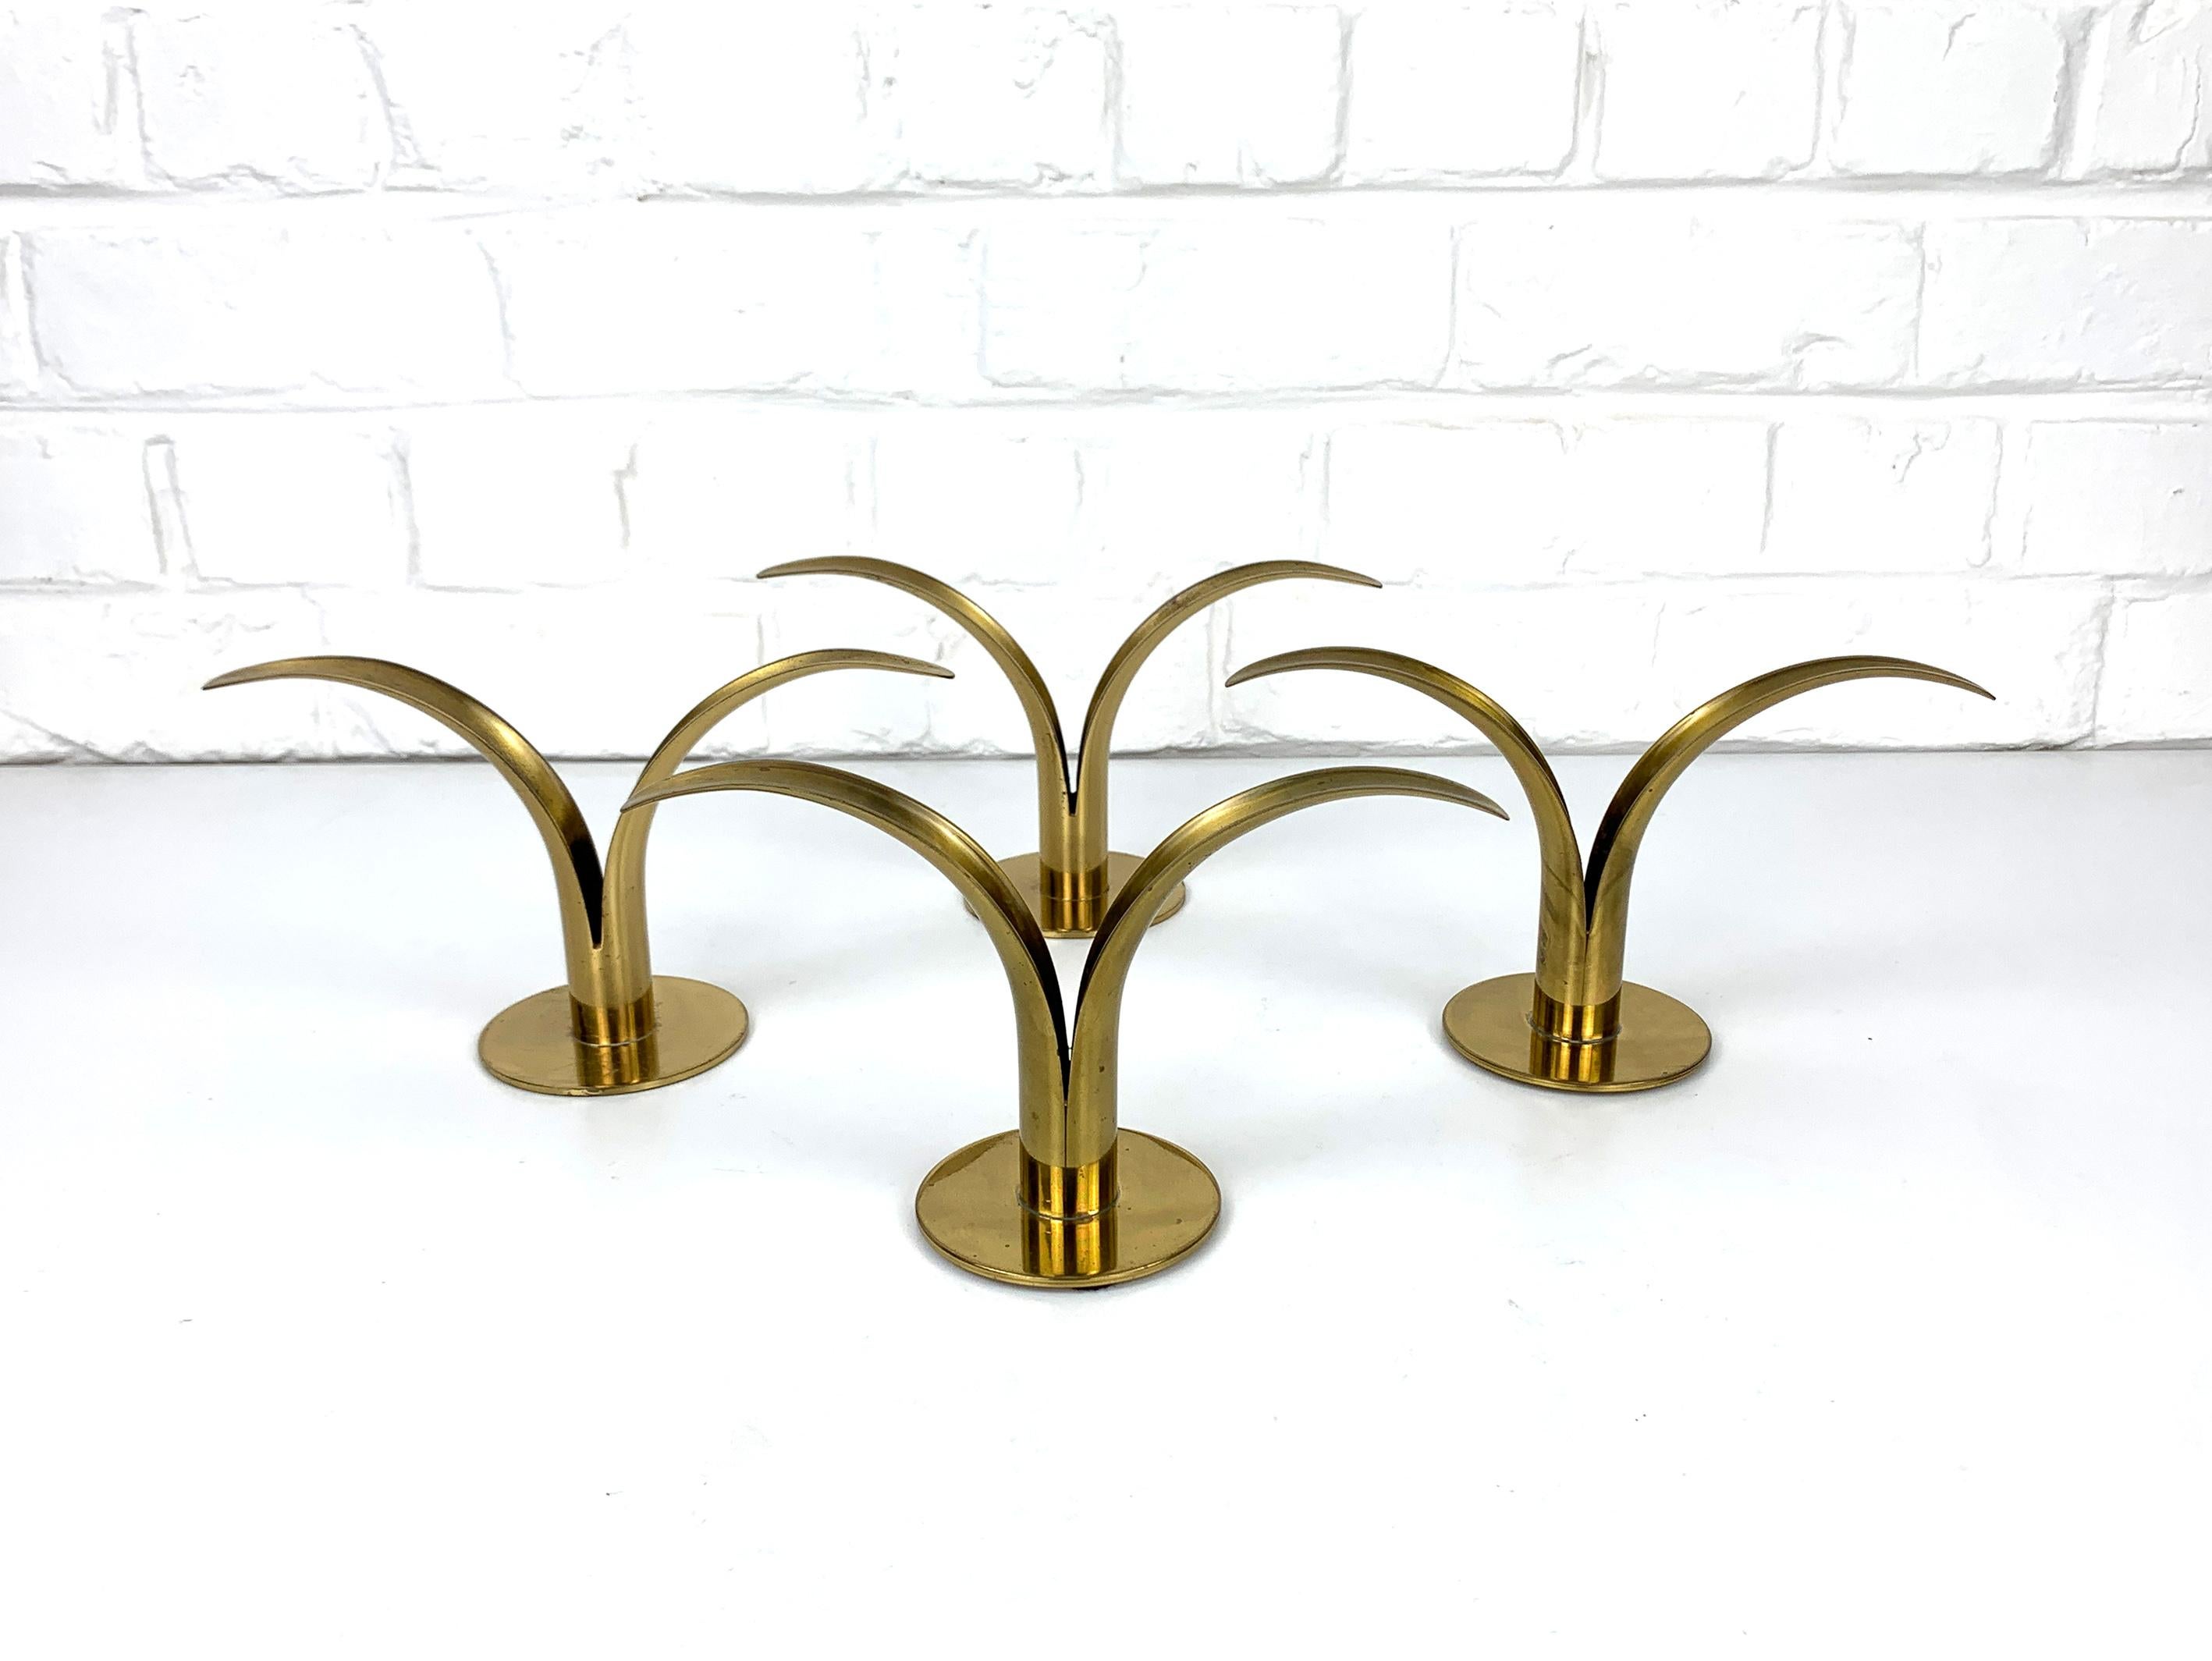 Set of 4 iconic mid-century brass candle holders “Lily”. 
Created by Ivar Ålenius-Björk in 1939. Made in Sweden by Ystad Metall.

Many copies on the market, but this is the real deal. 
Each of them is signed beneath. 
Made of massive brass with